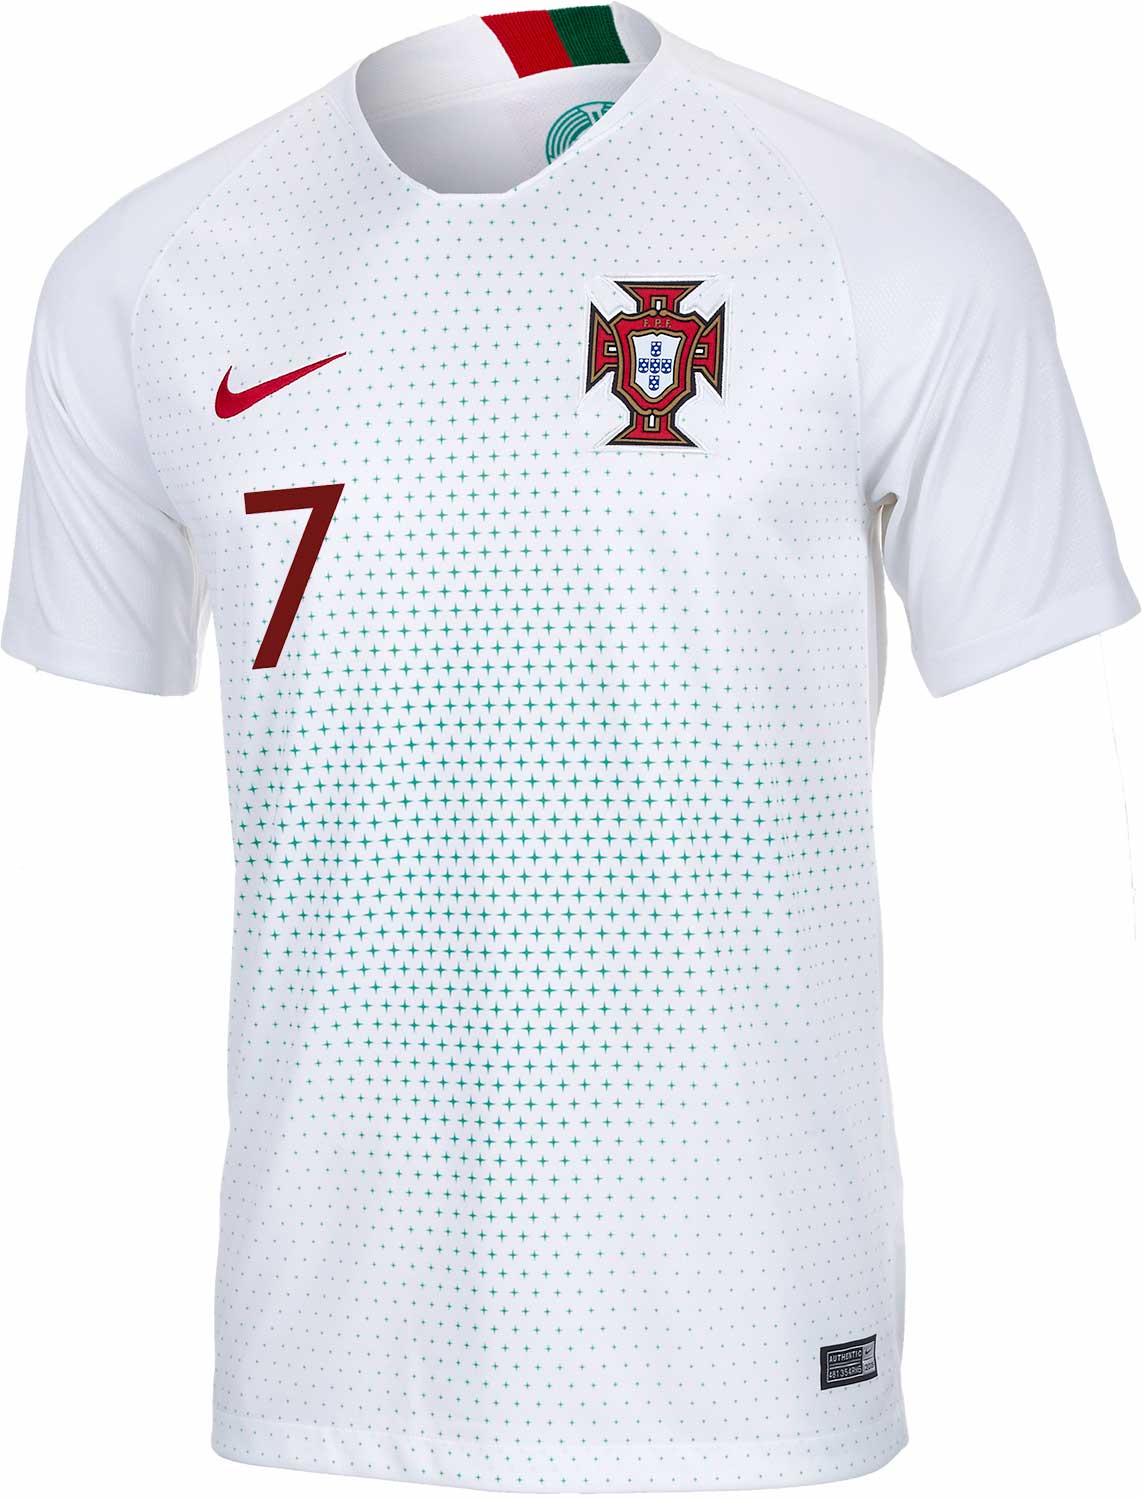 cr7 in portugal jersey